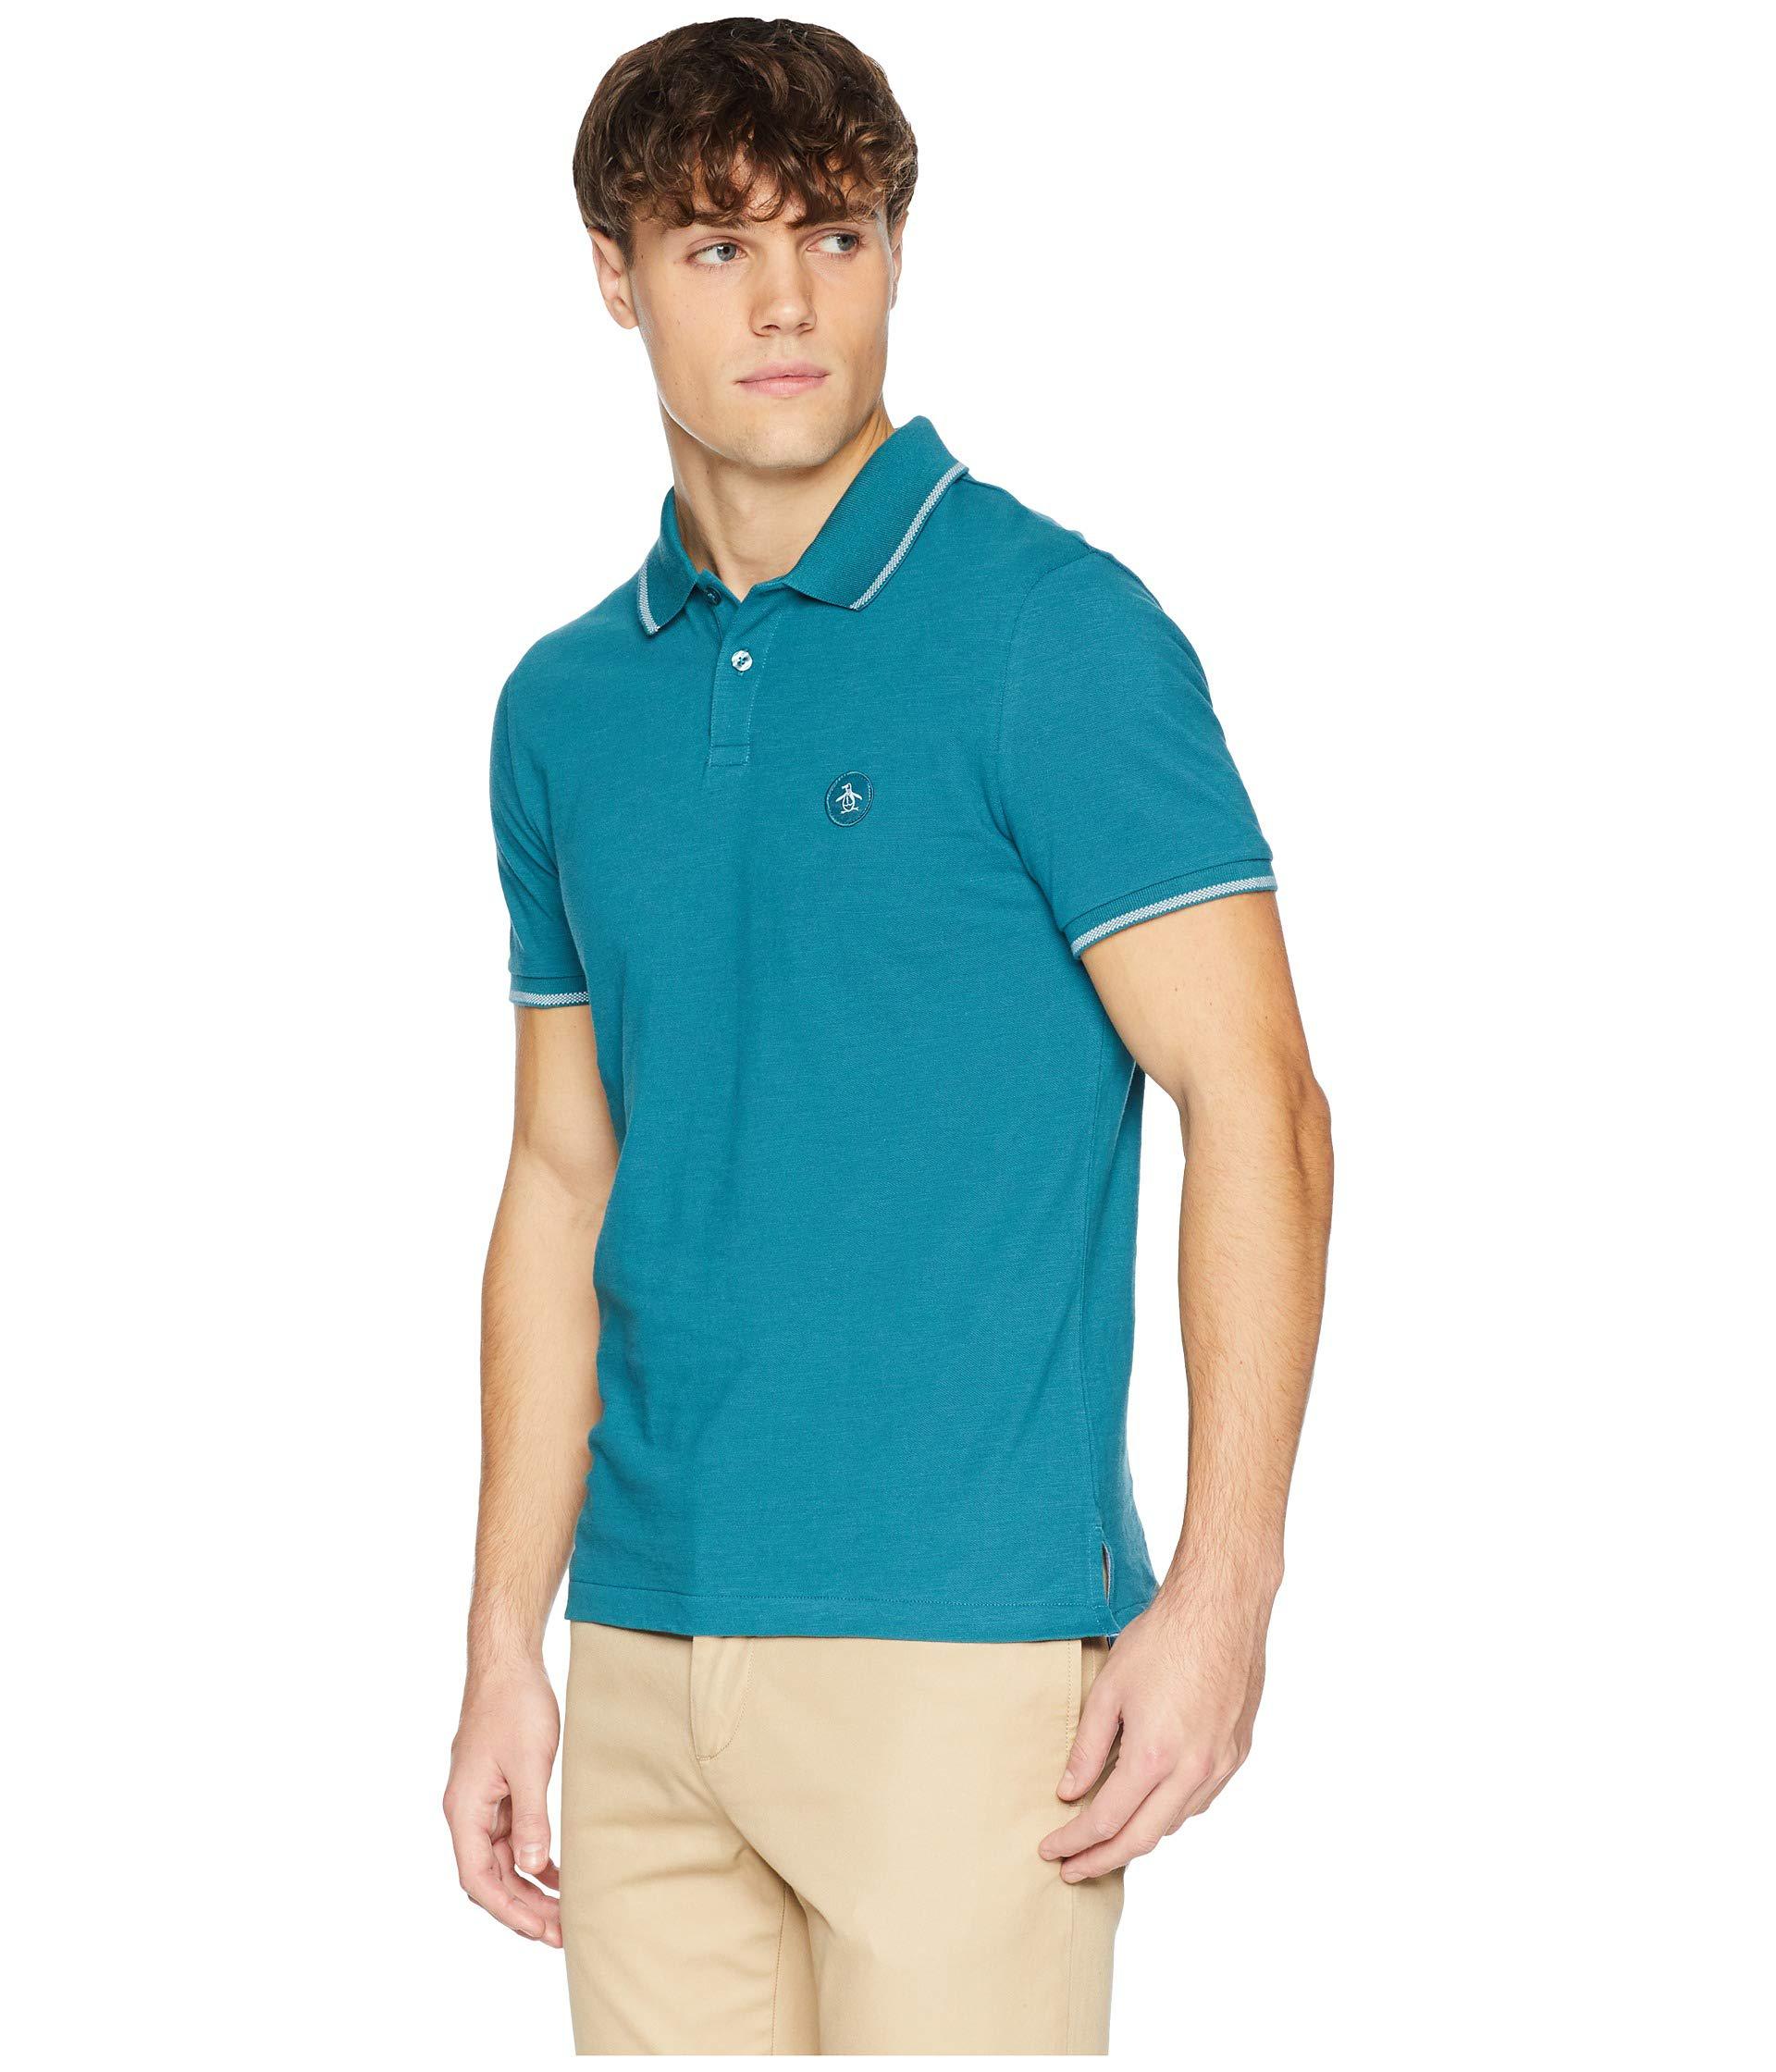 Download Mens Short Sleeve Pique Polo Shirt Back Half Side View ...